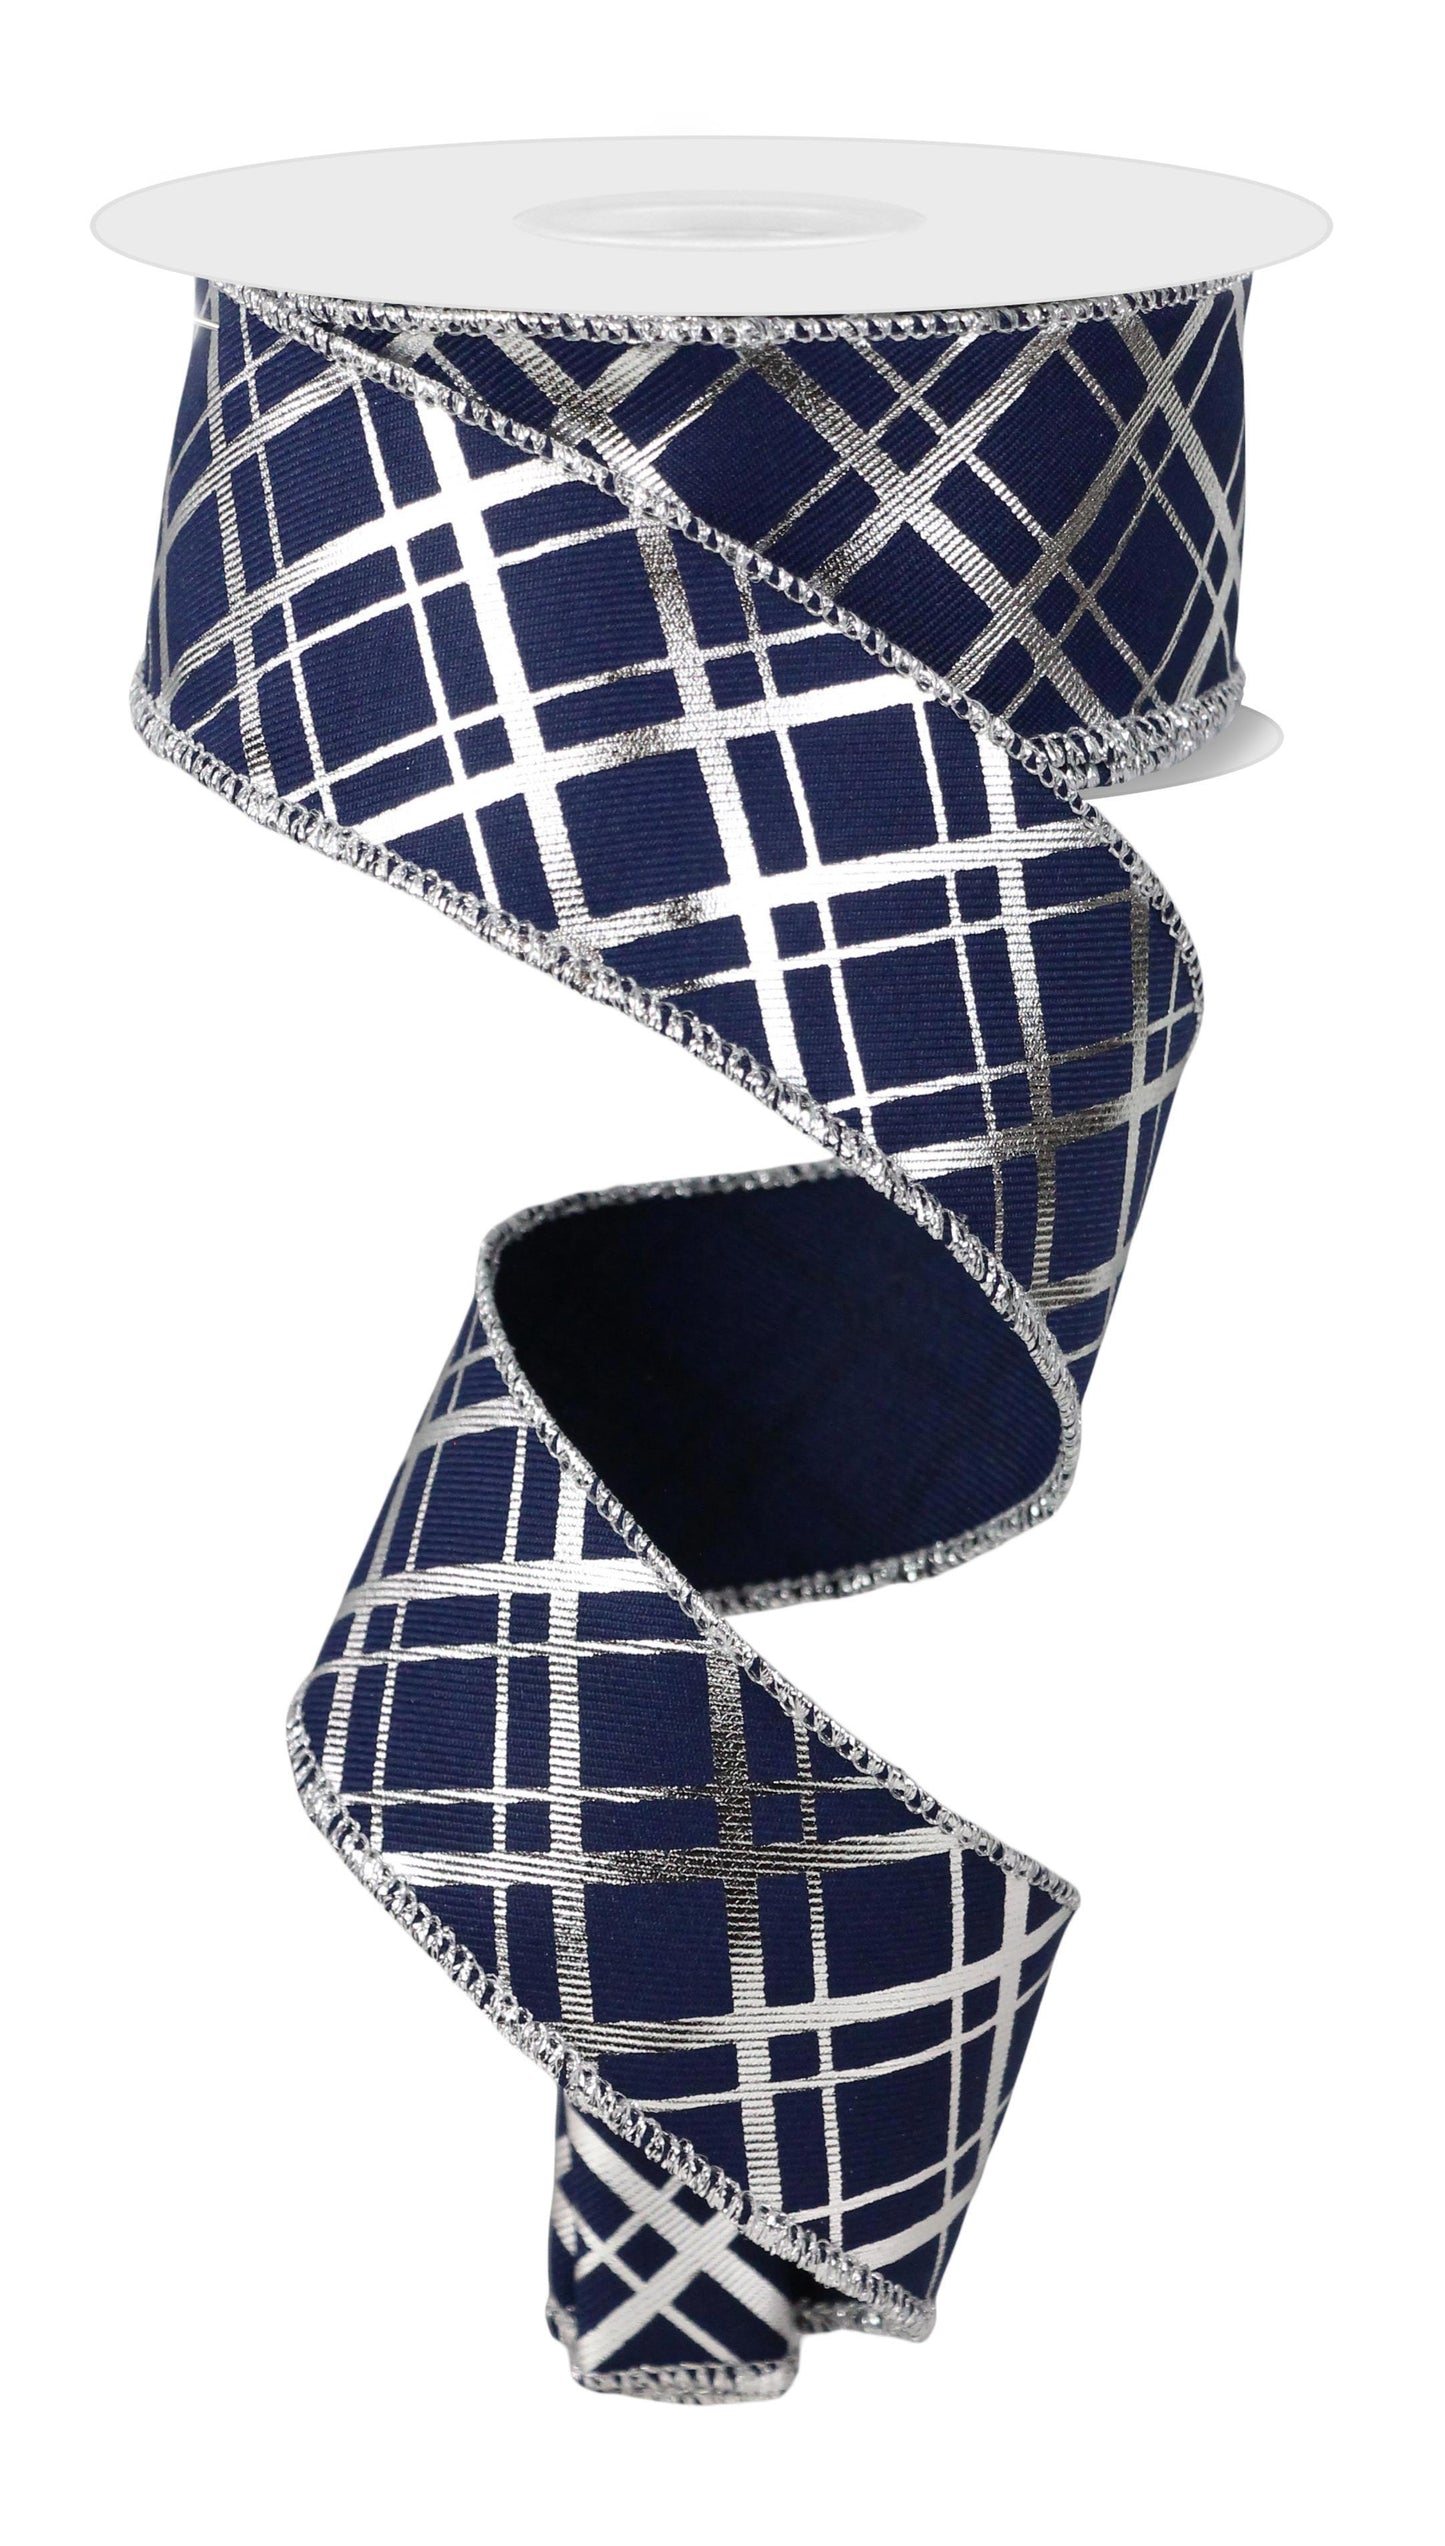 Wired Ribbon * Metallic Thick/Thin Diagonal * Navy Blue and Silver * 1.5" x 10 Yards * Canvas * RGE167363